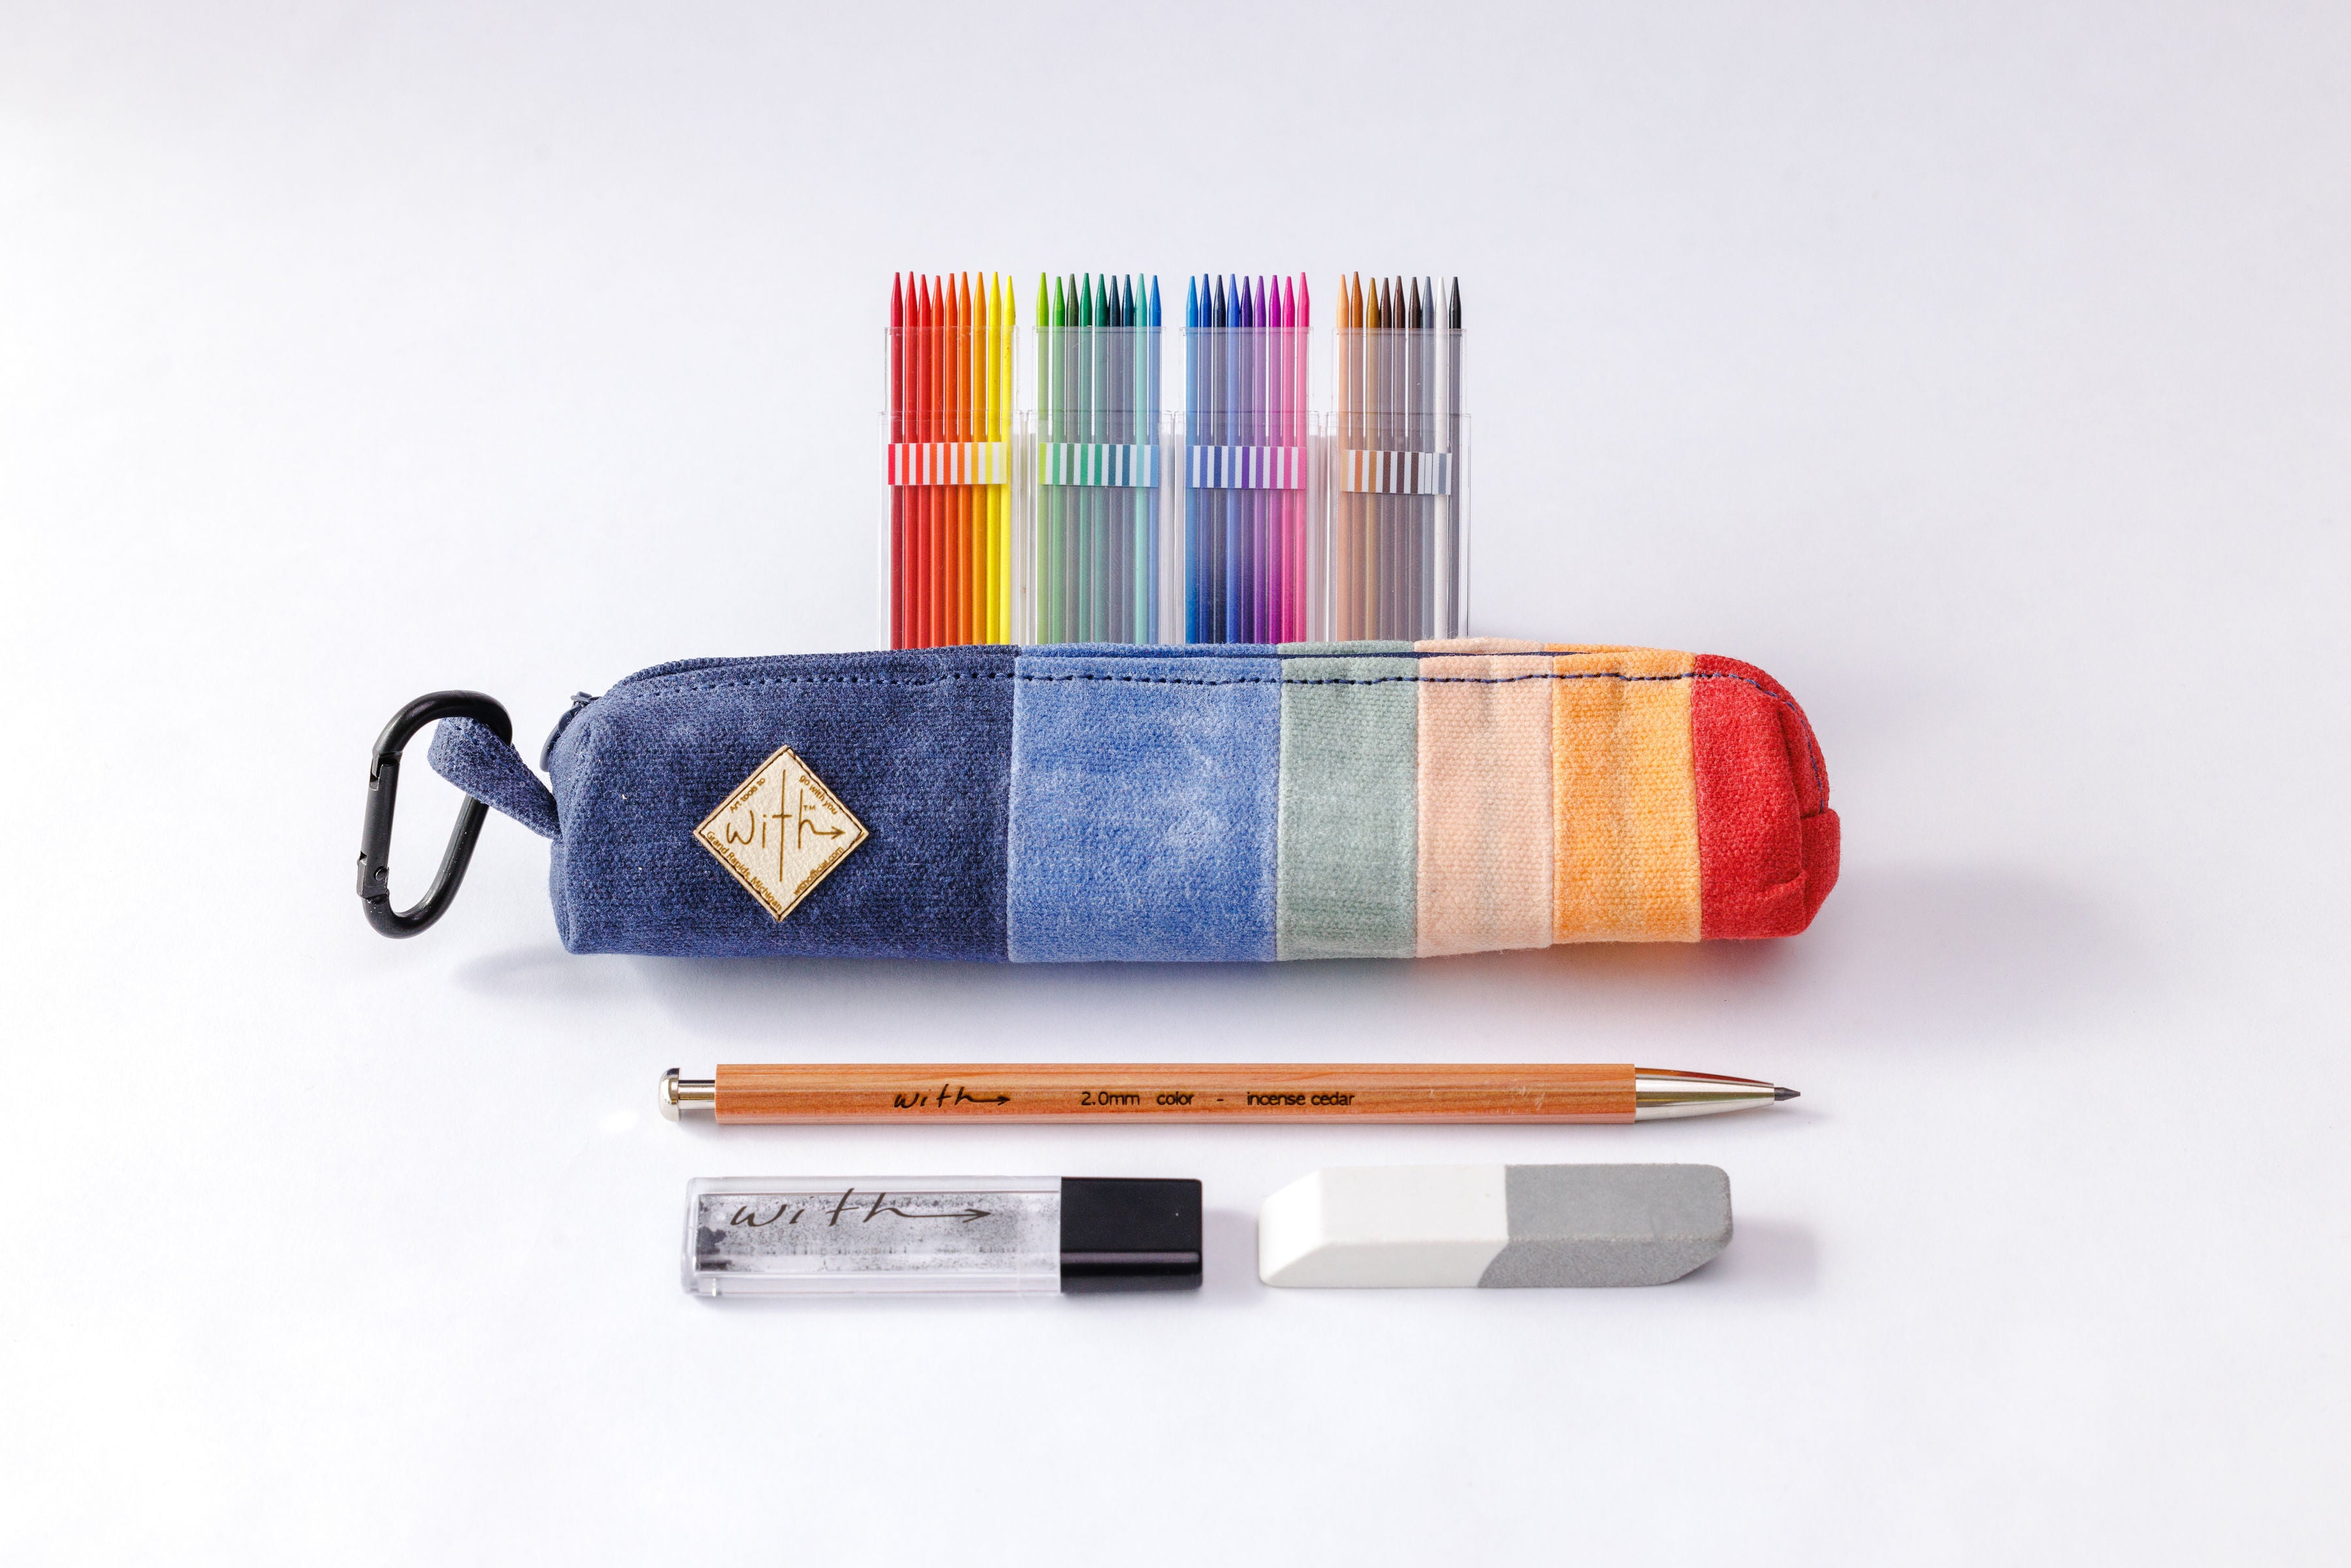 Louis Vuitton colouring pencils are here for those who live to